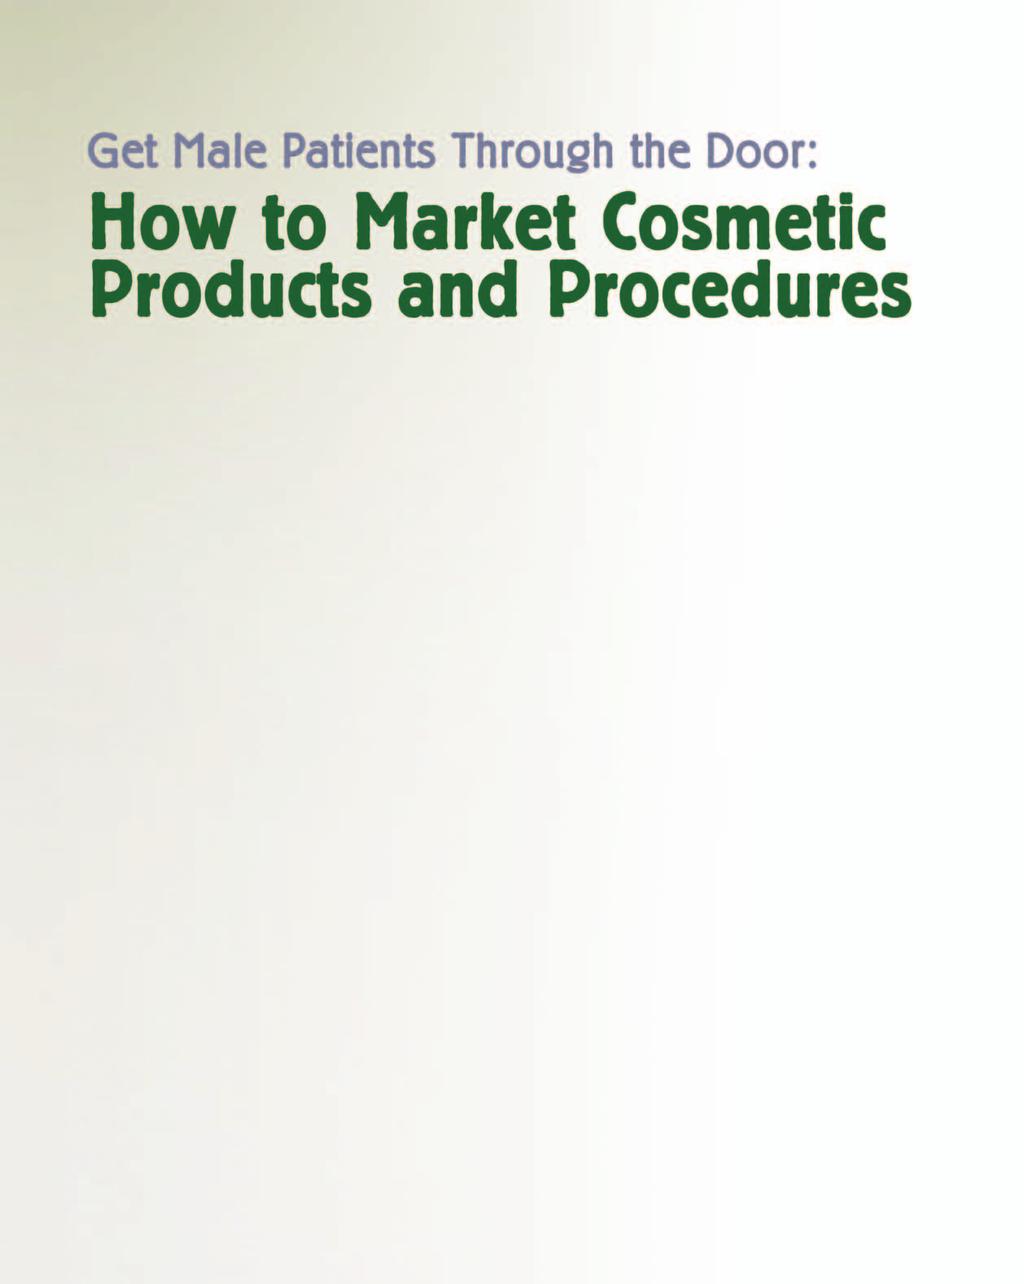 With the right techniques, you can cost-effectively maximize marketing efforts, attract male patients, and increase the demand for cosmetics in your practice.